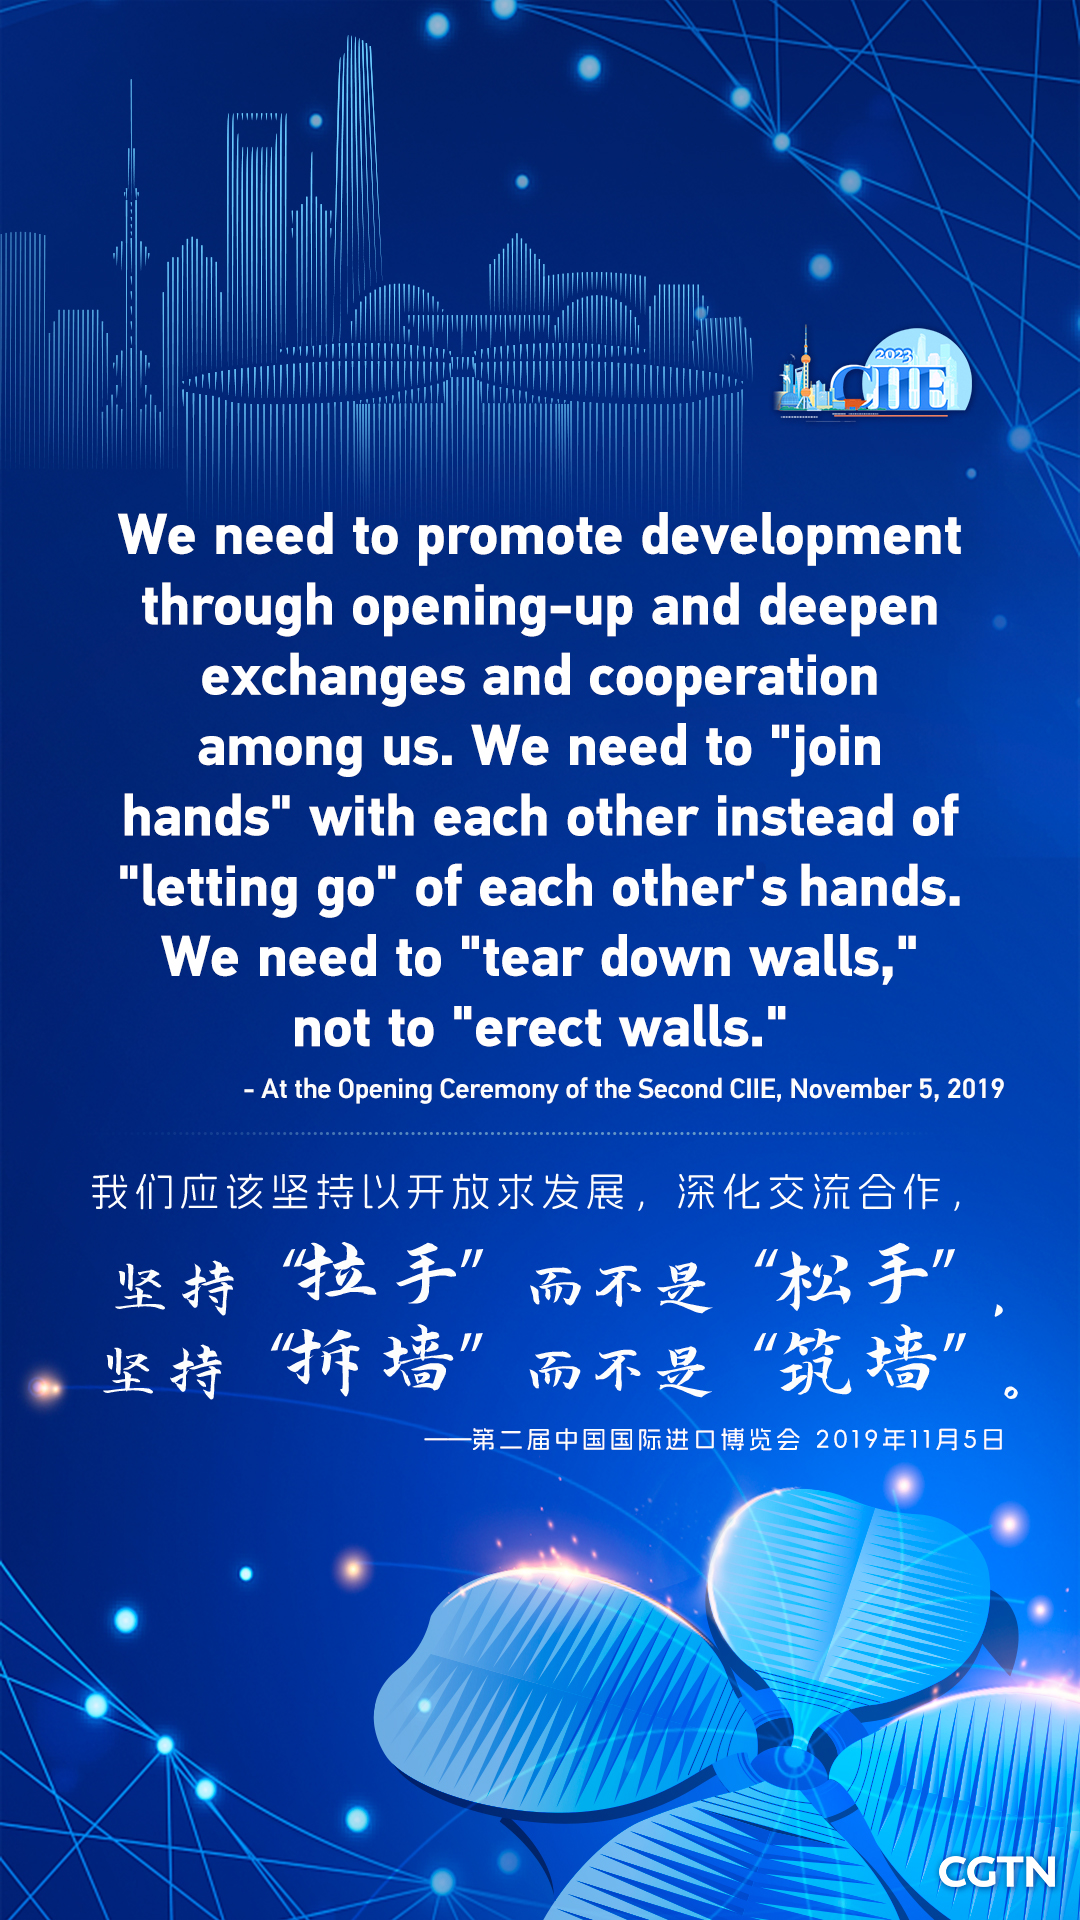 Xi Jinping's key quotes on high-level opening up